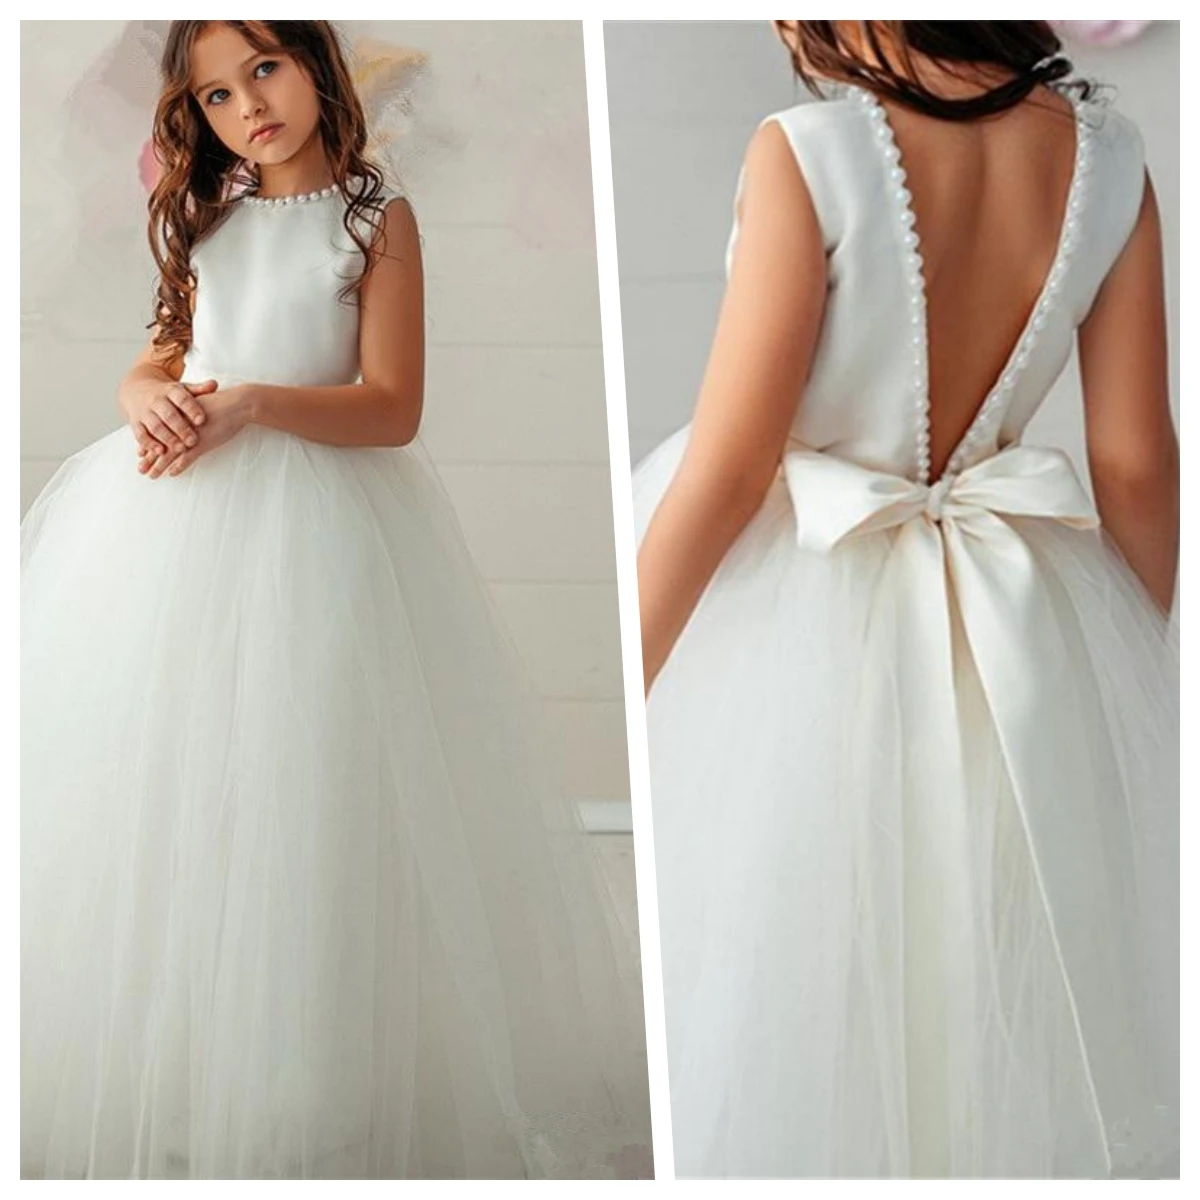 

Backless Pearls Bow Flower Girl Dress Trailer Puffy Wedding Party Gowns For Girl First Communion Dresses Eucharist Girl Dress